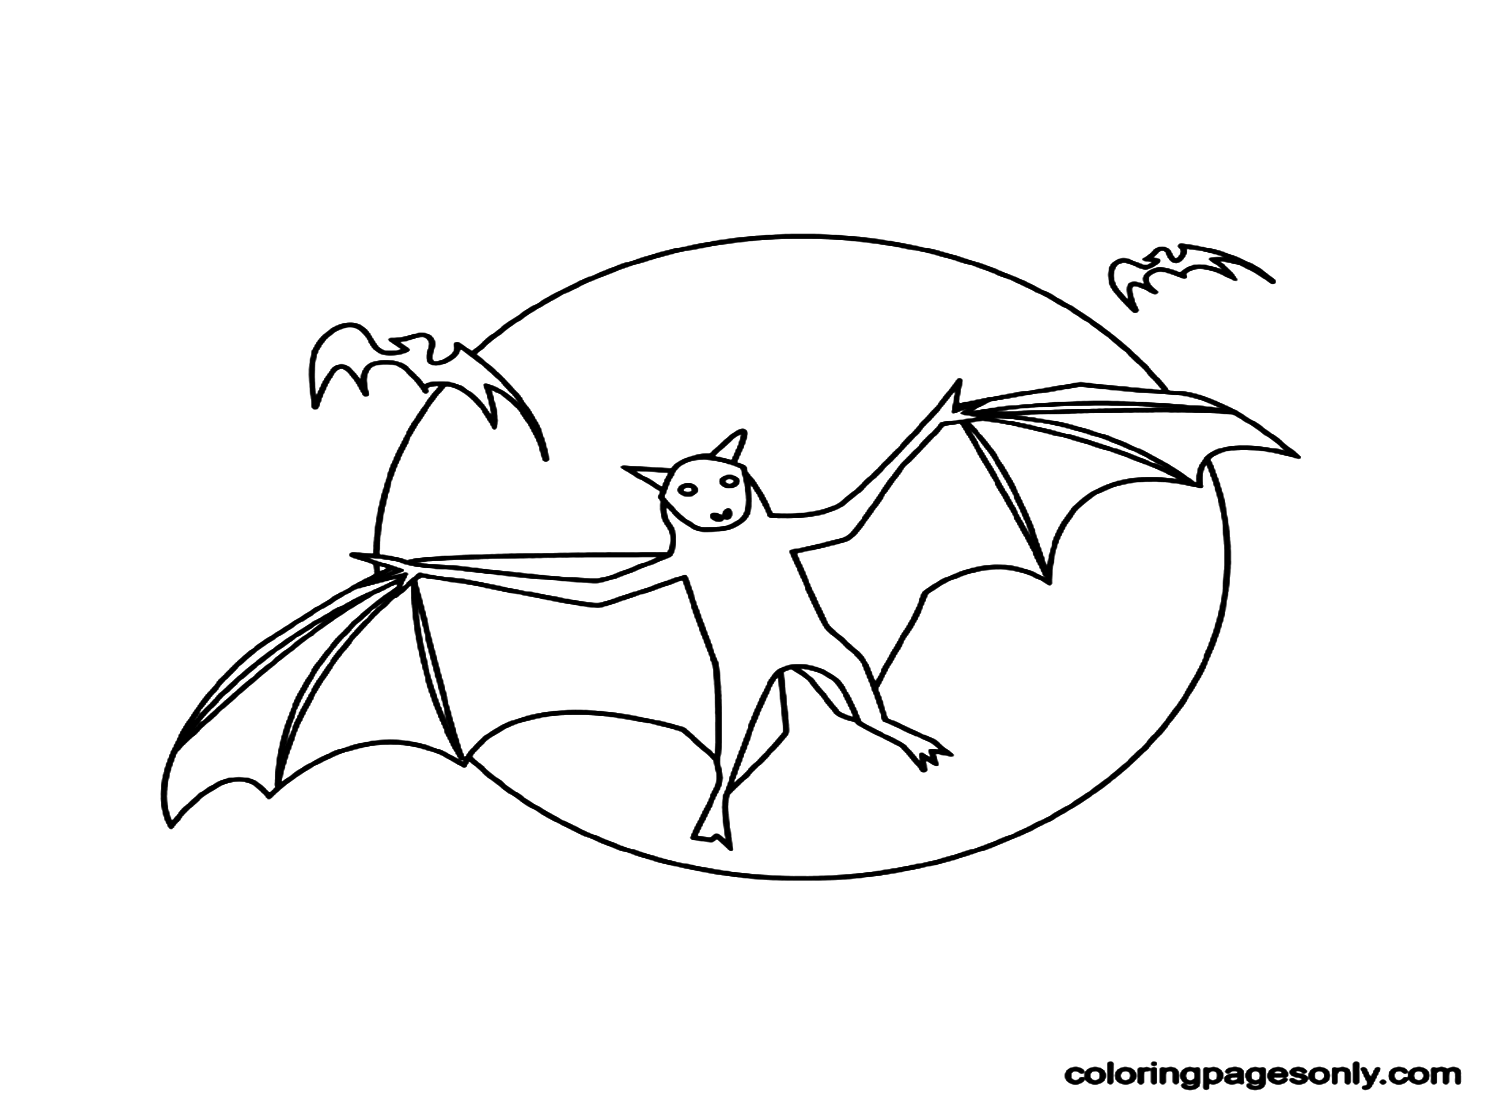 coloring-pictures-of-halloween-bats-halloween-bats-coloring-pages